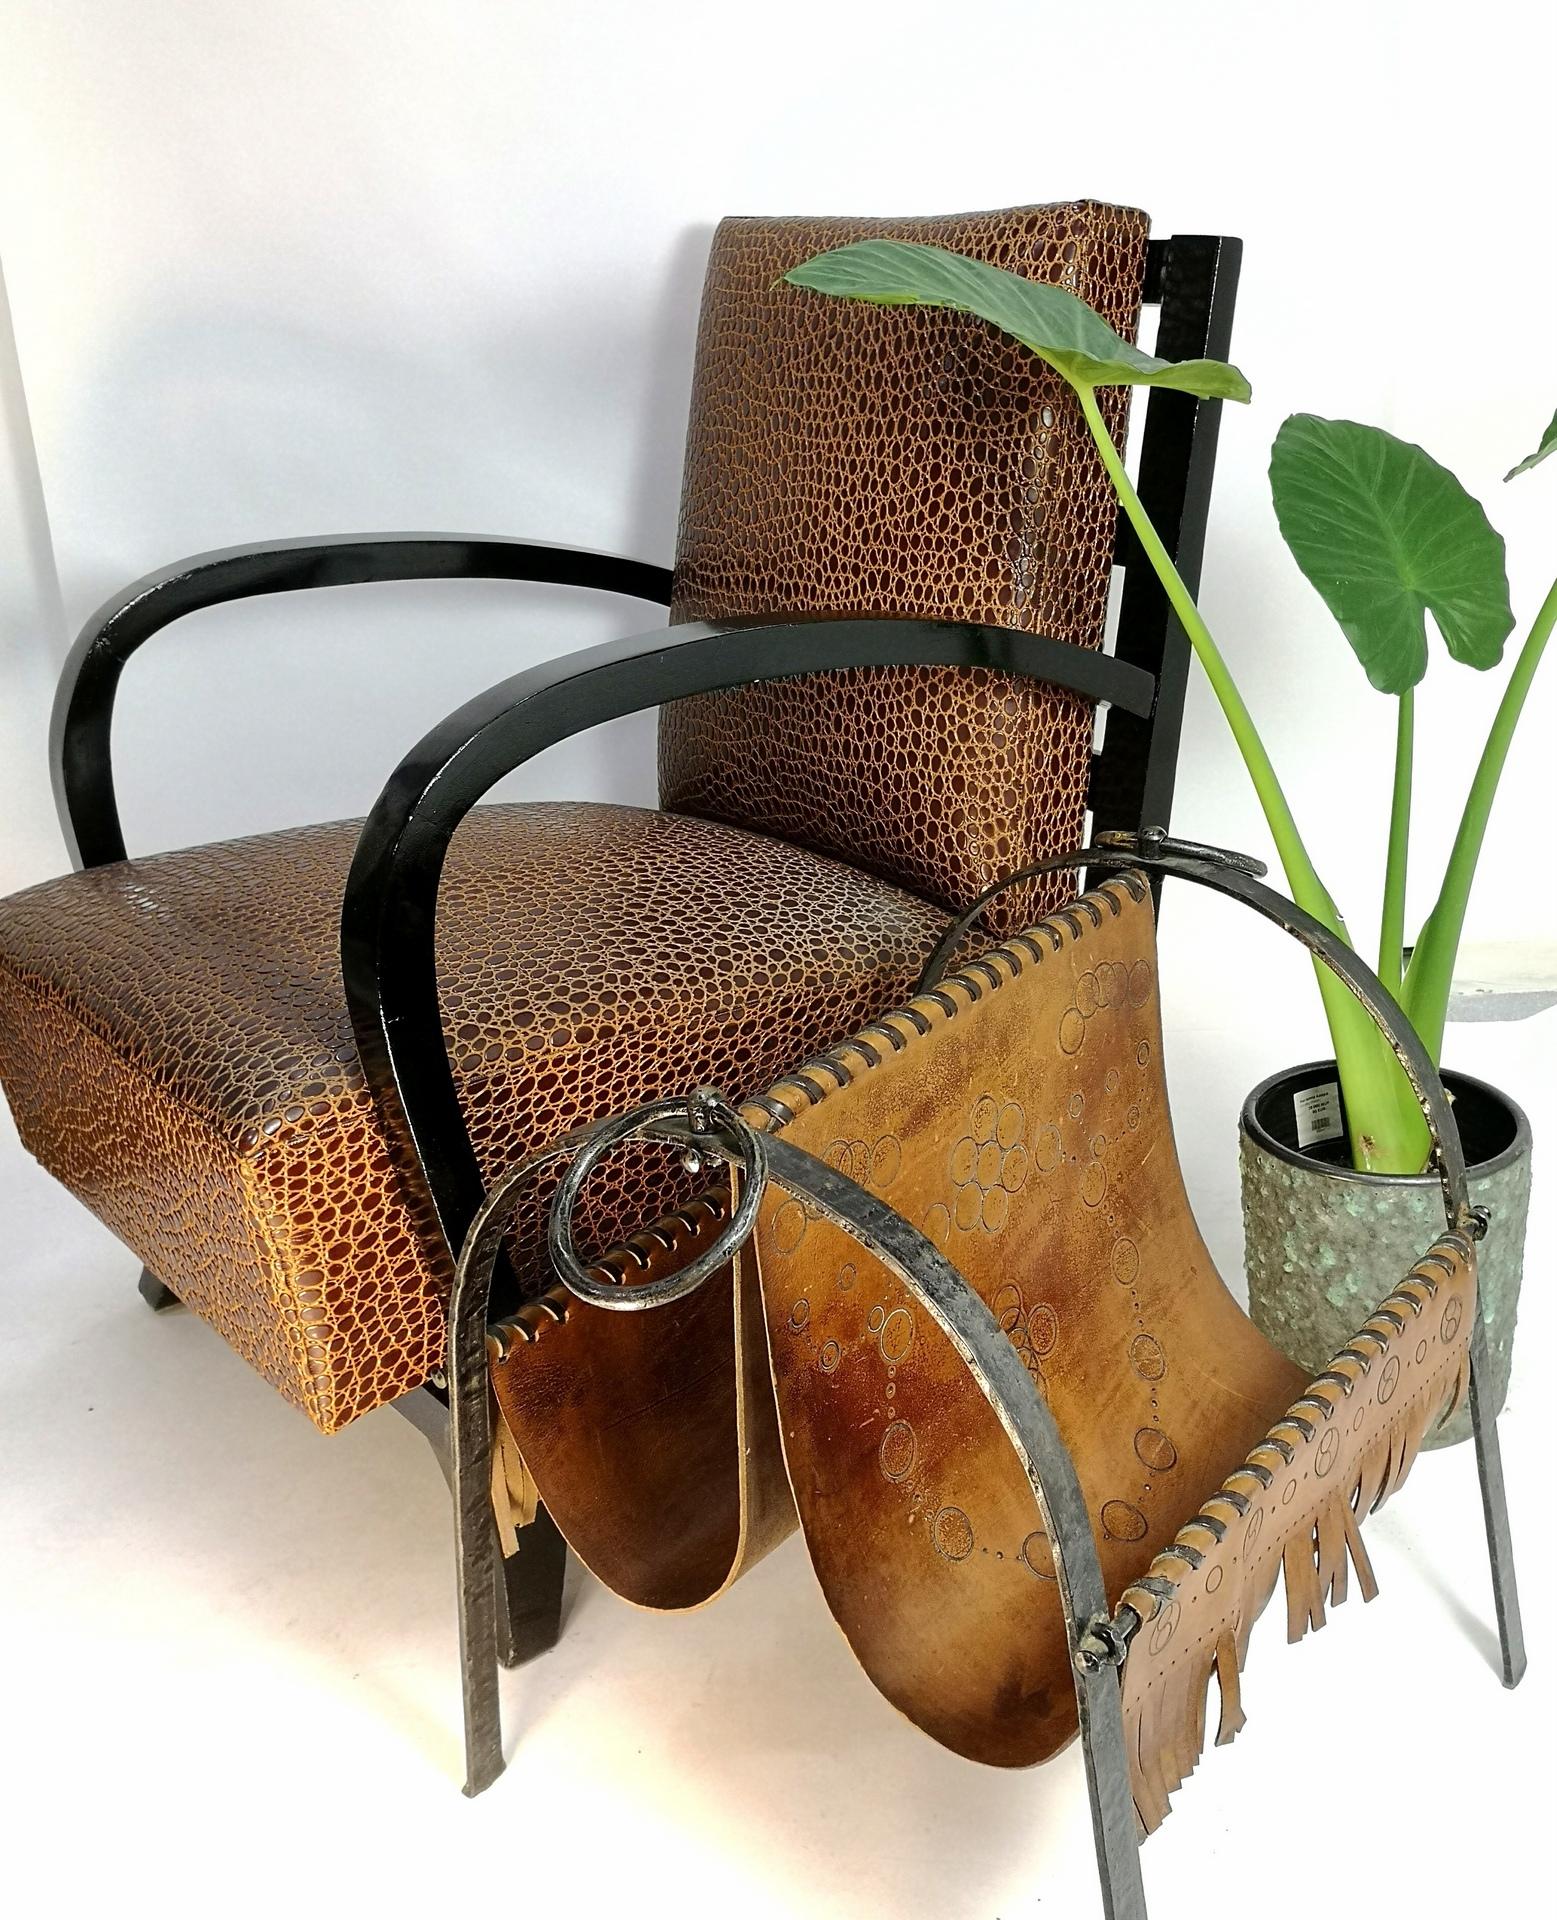 This hand made cow leather and wrought iron magazine holder was made in the 1970's- and is in great condition. The leather has no rips or tears, the wrought iron is in good condition. Very decorative piece for any home!